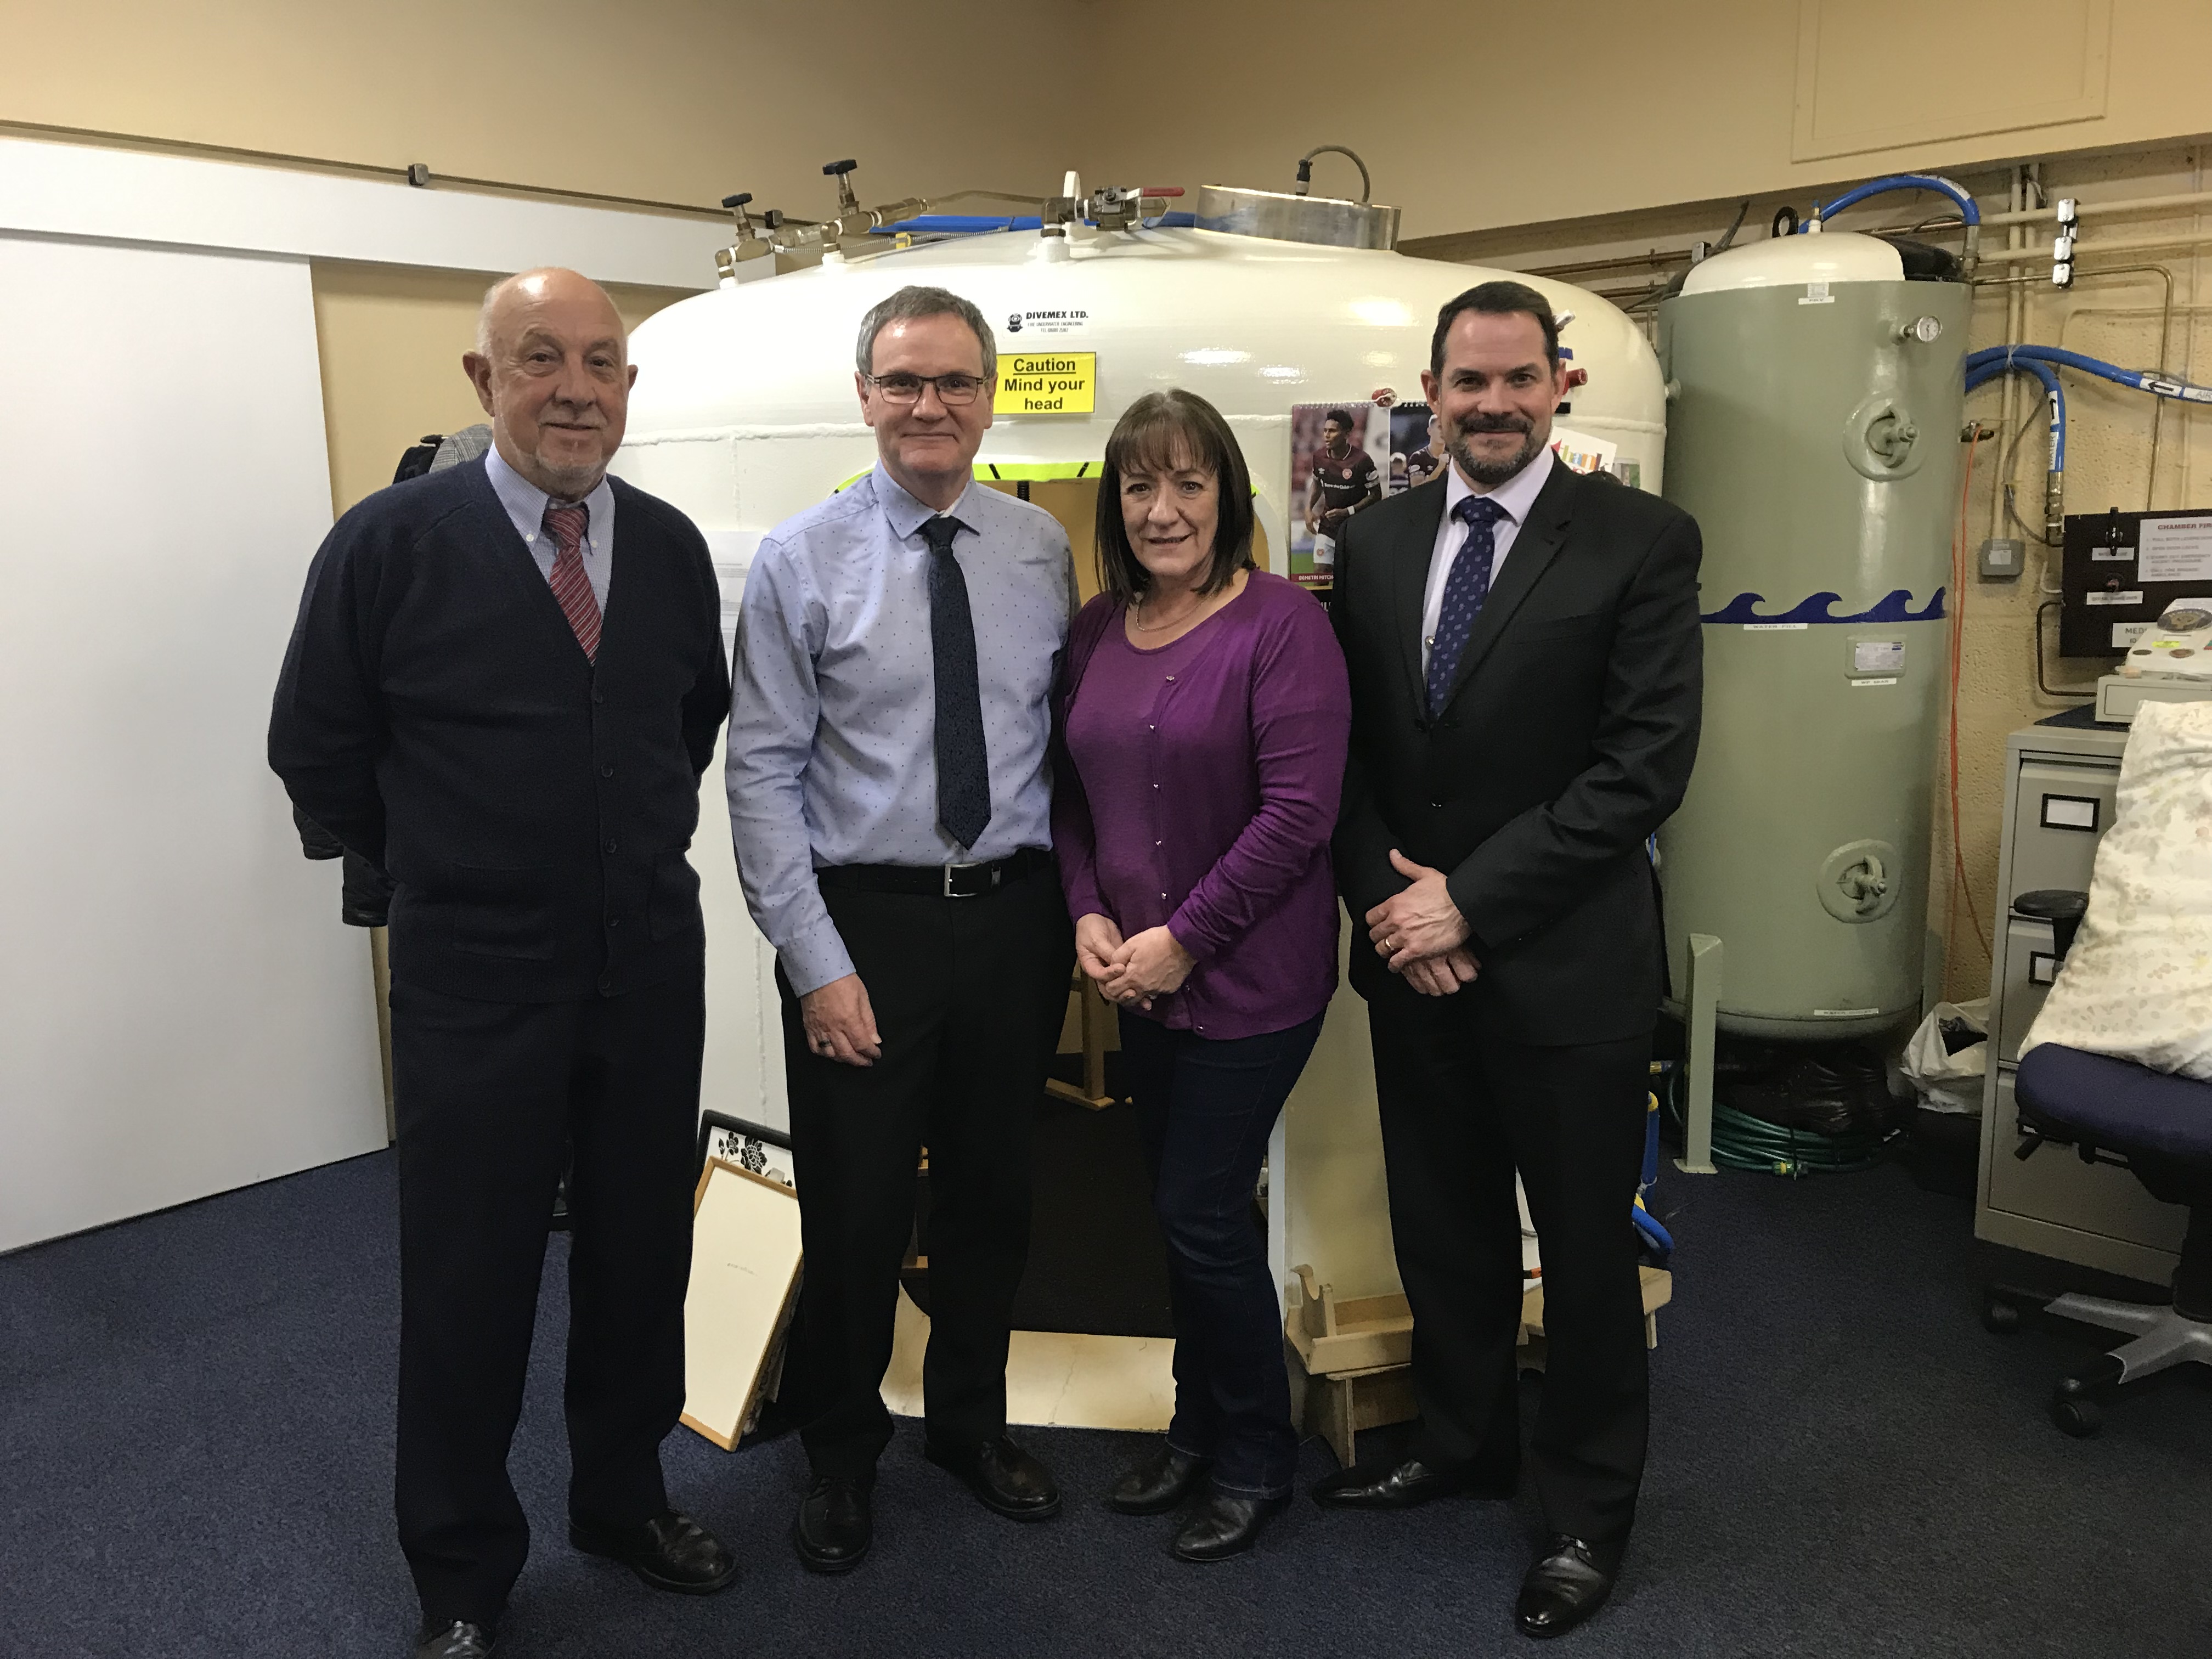 Jim Craig, MS Therapy Centre volunteer, Steve Simpson,  Bristow Helicopters ECR Simulator & Facilities Manager, Eileen Matthew, MS Therapy Centre manager and Matt Rhodes, Bristow Director UK & Turkmenistan Oil and Gas